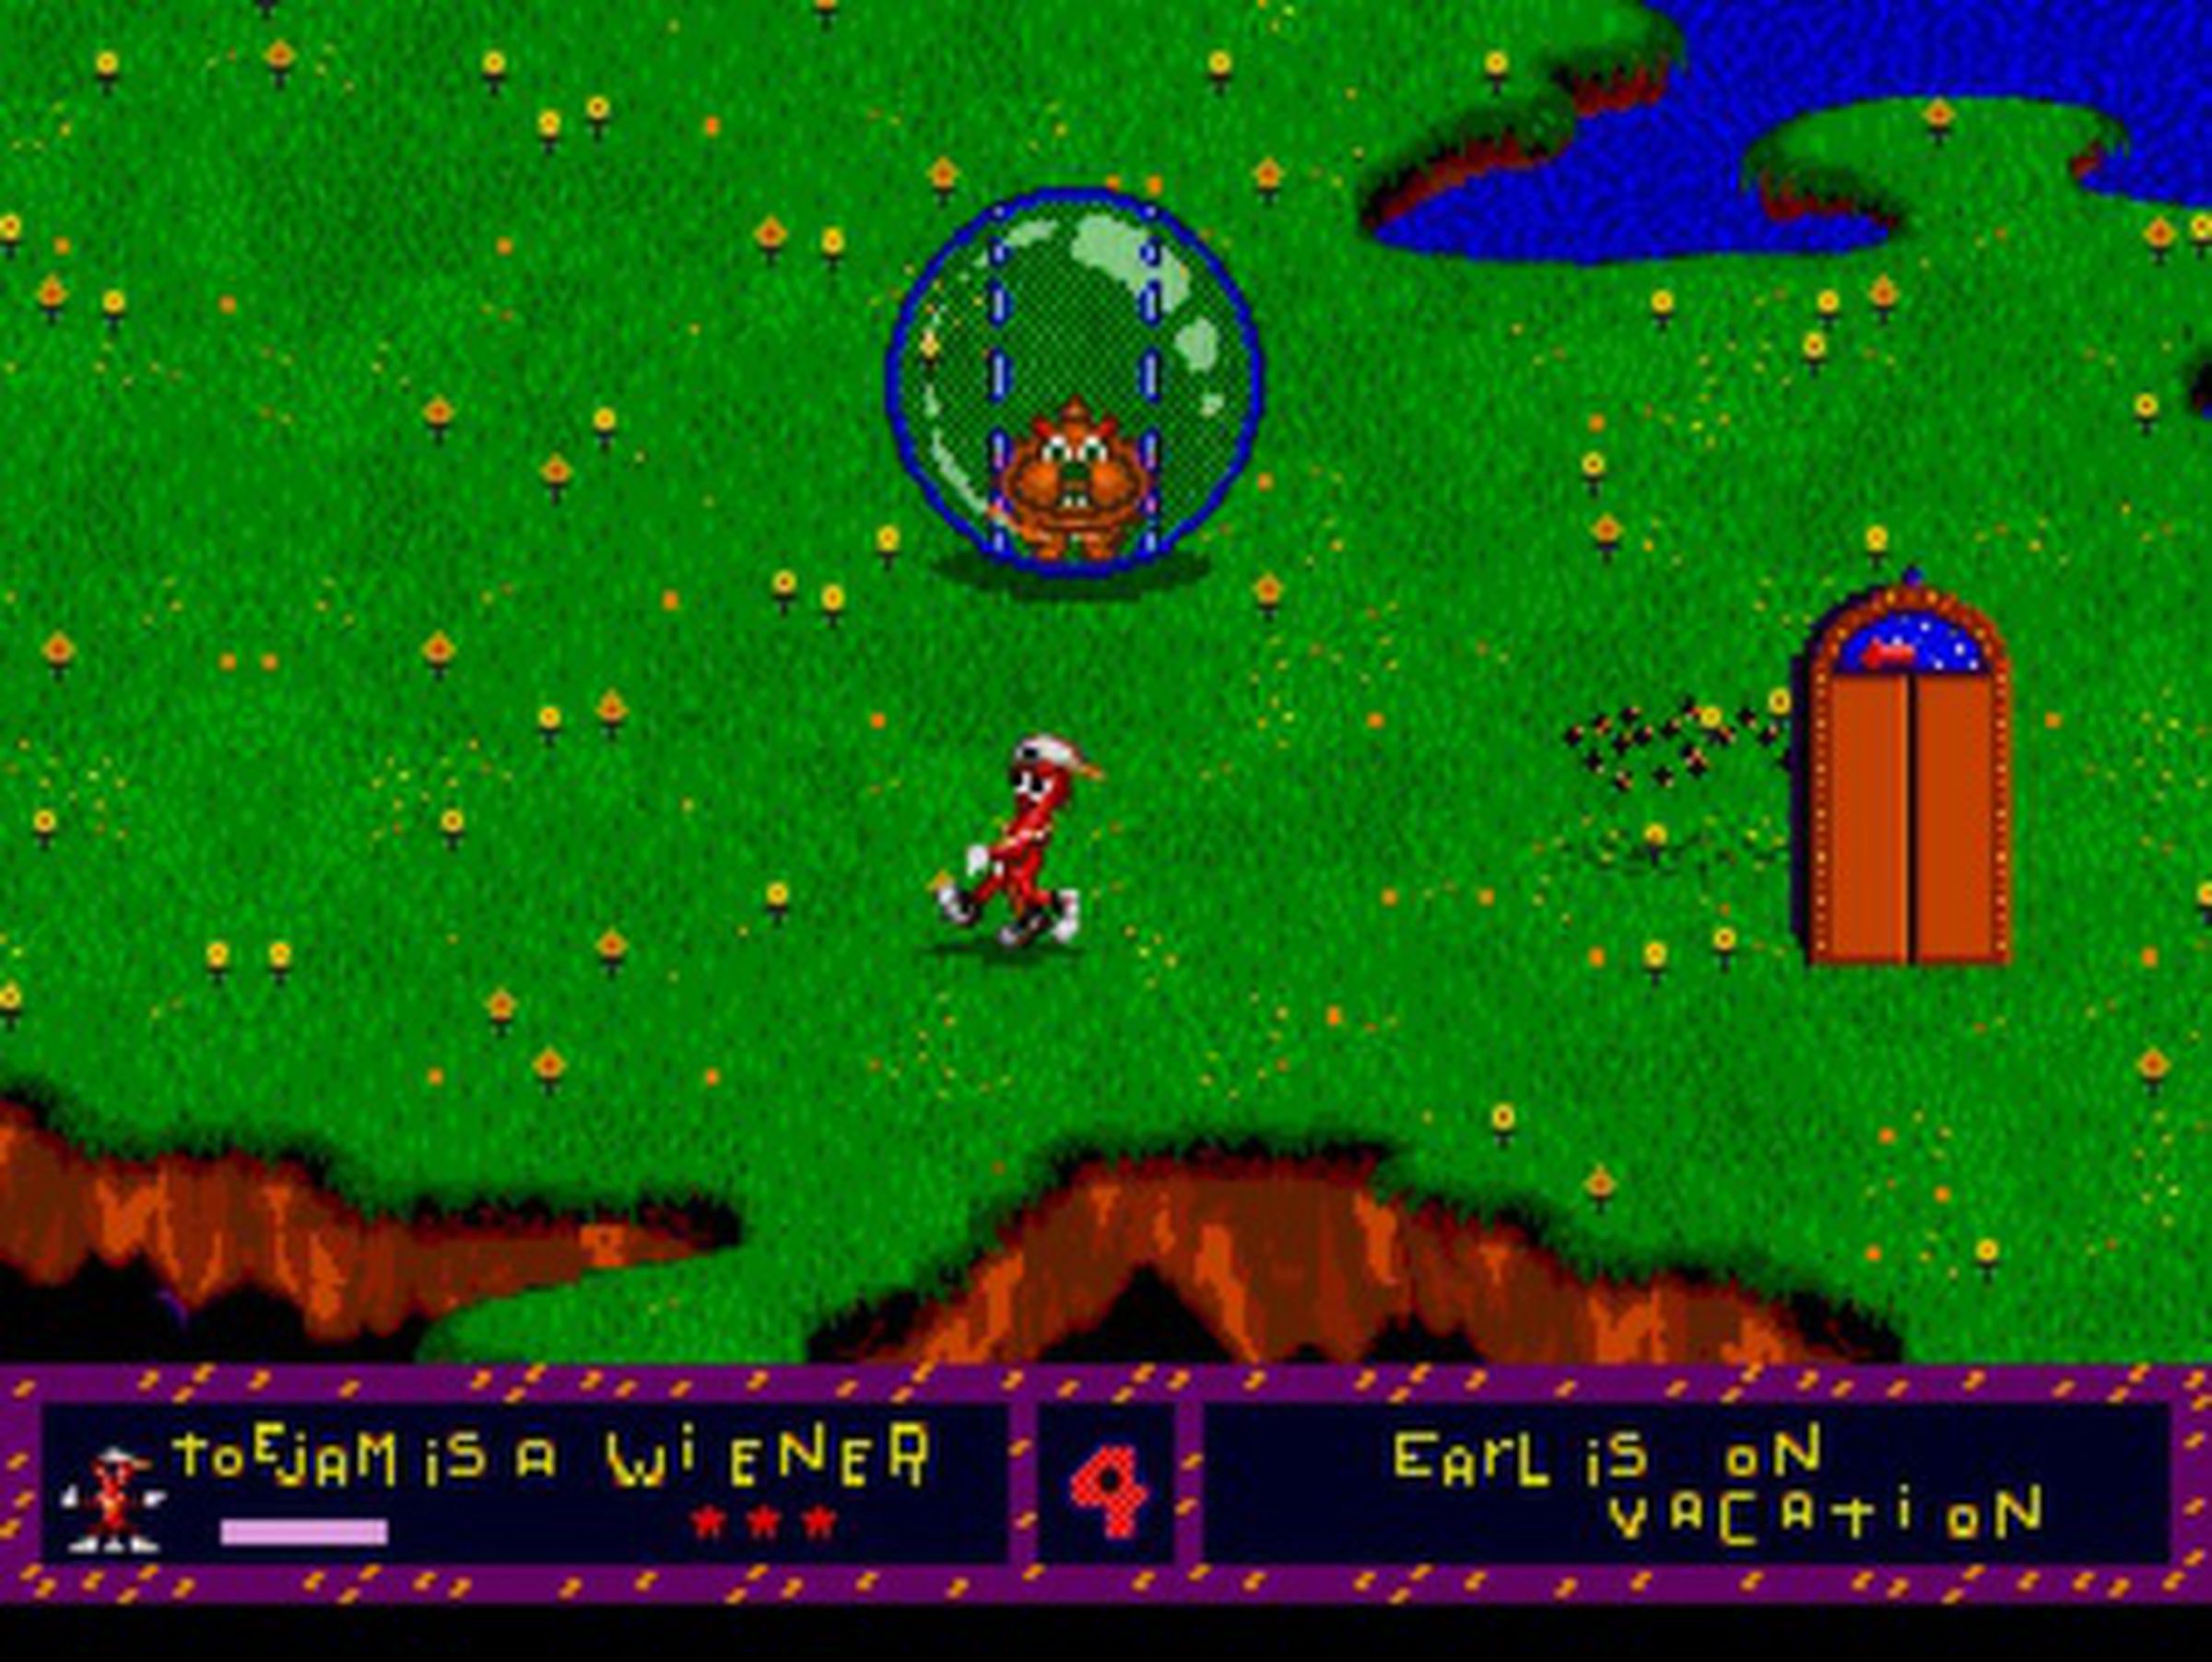 You can still get the original ToeJam & Earl on Steam for just 99 cents.